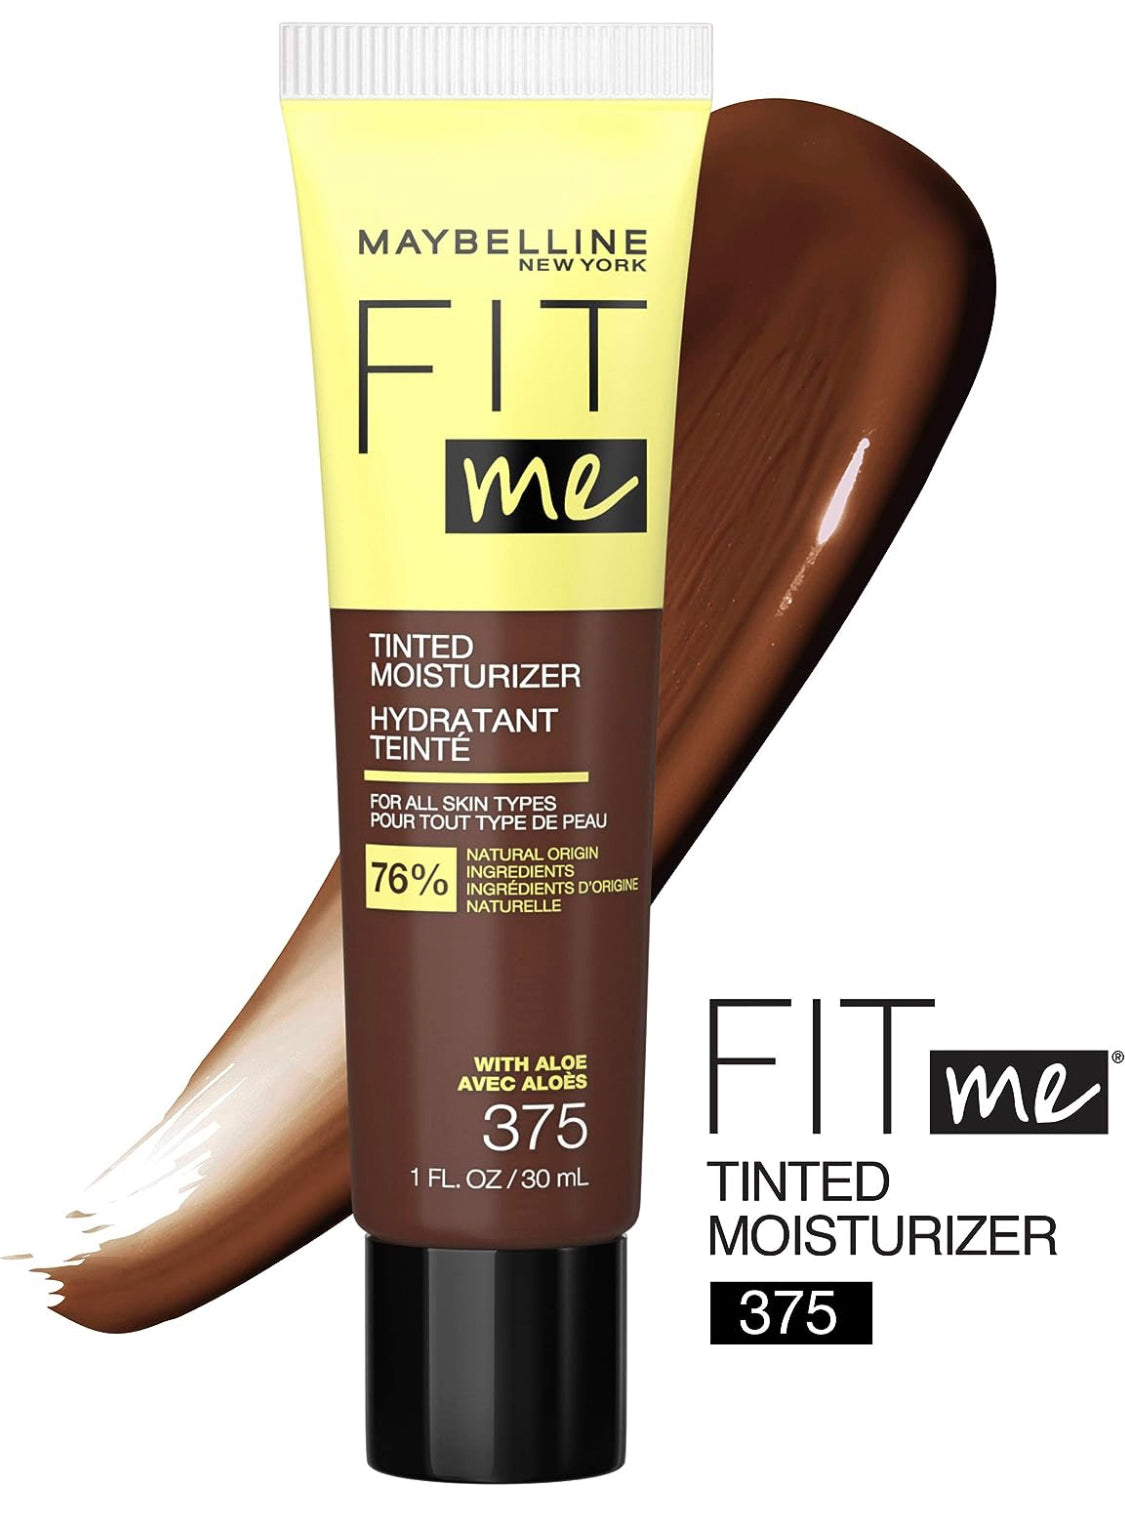 Maybelline New York Fit Me Tinted Moisturizer, Natural Coverage, 375